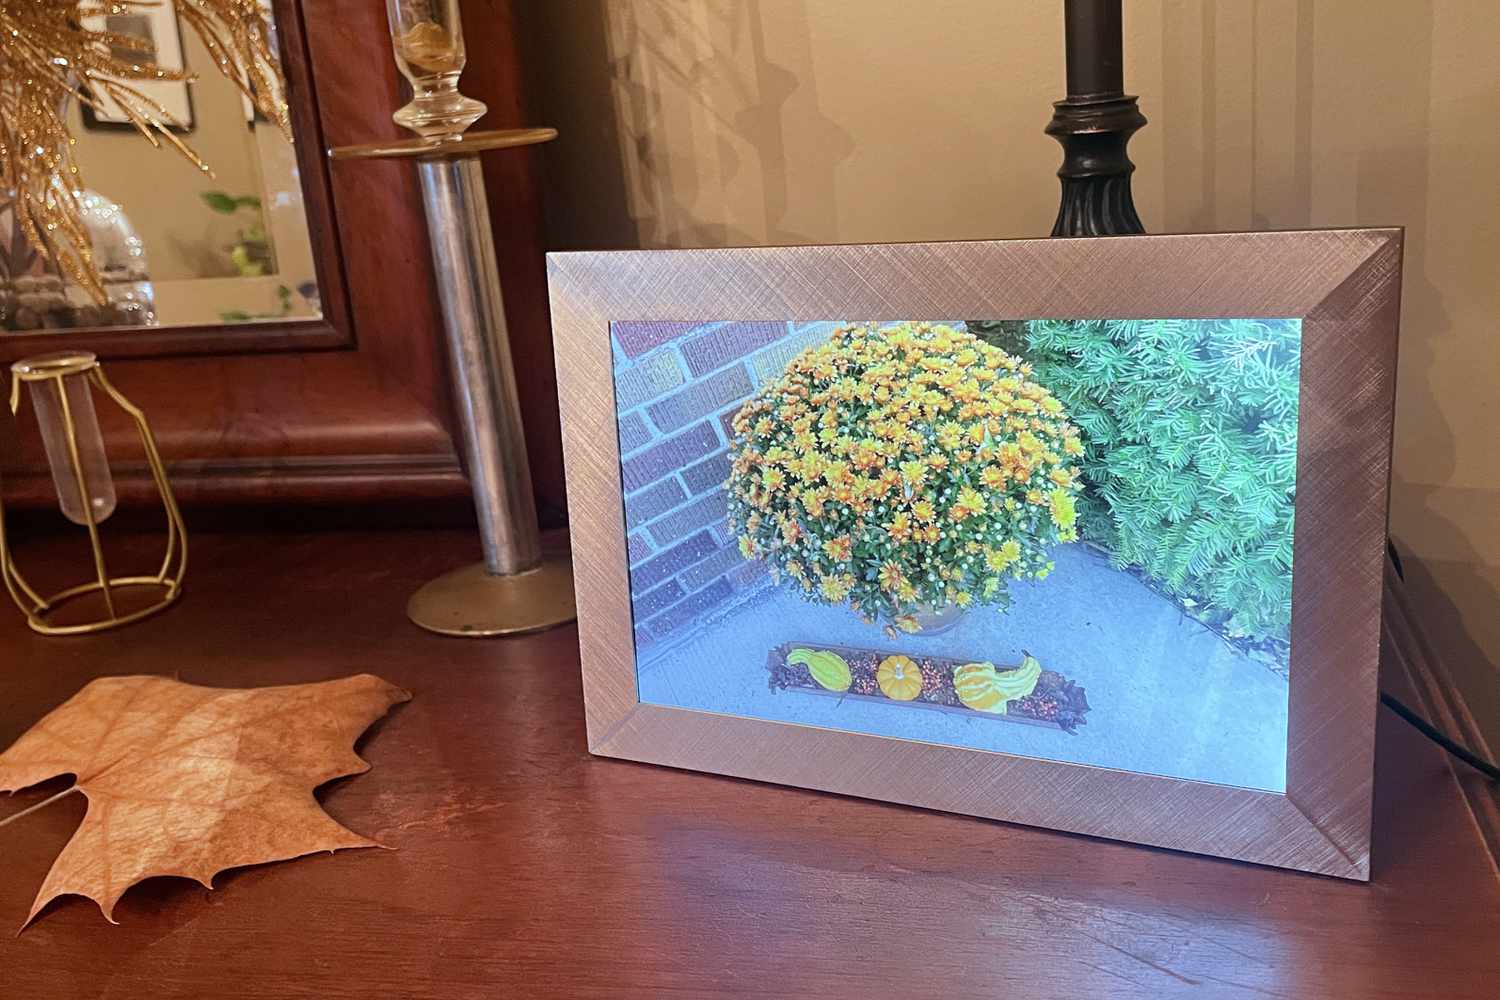 Polaroid Digital Photo Frame on a table displaying the outdoors on a table